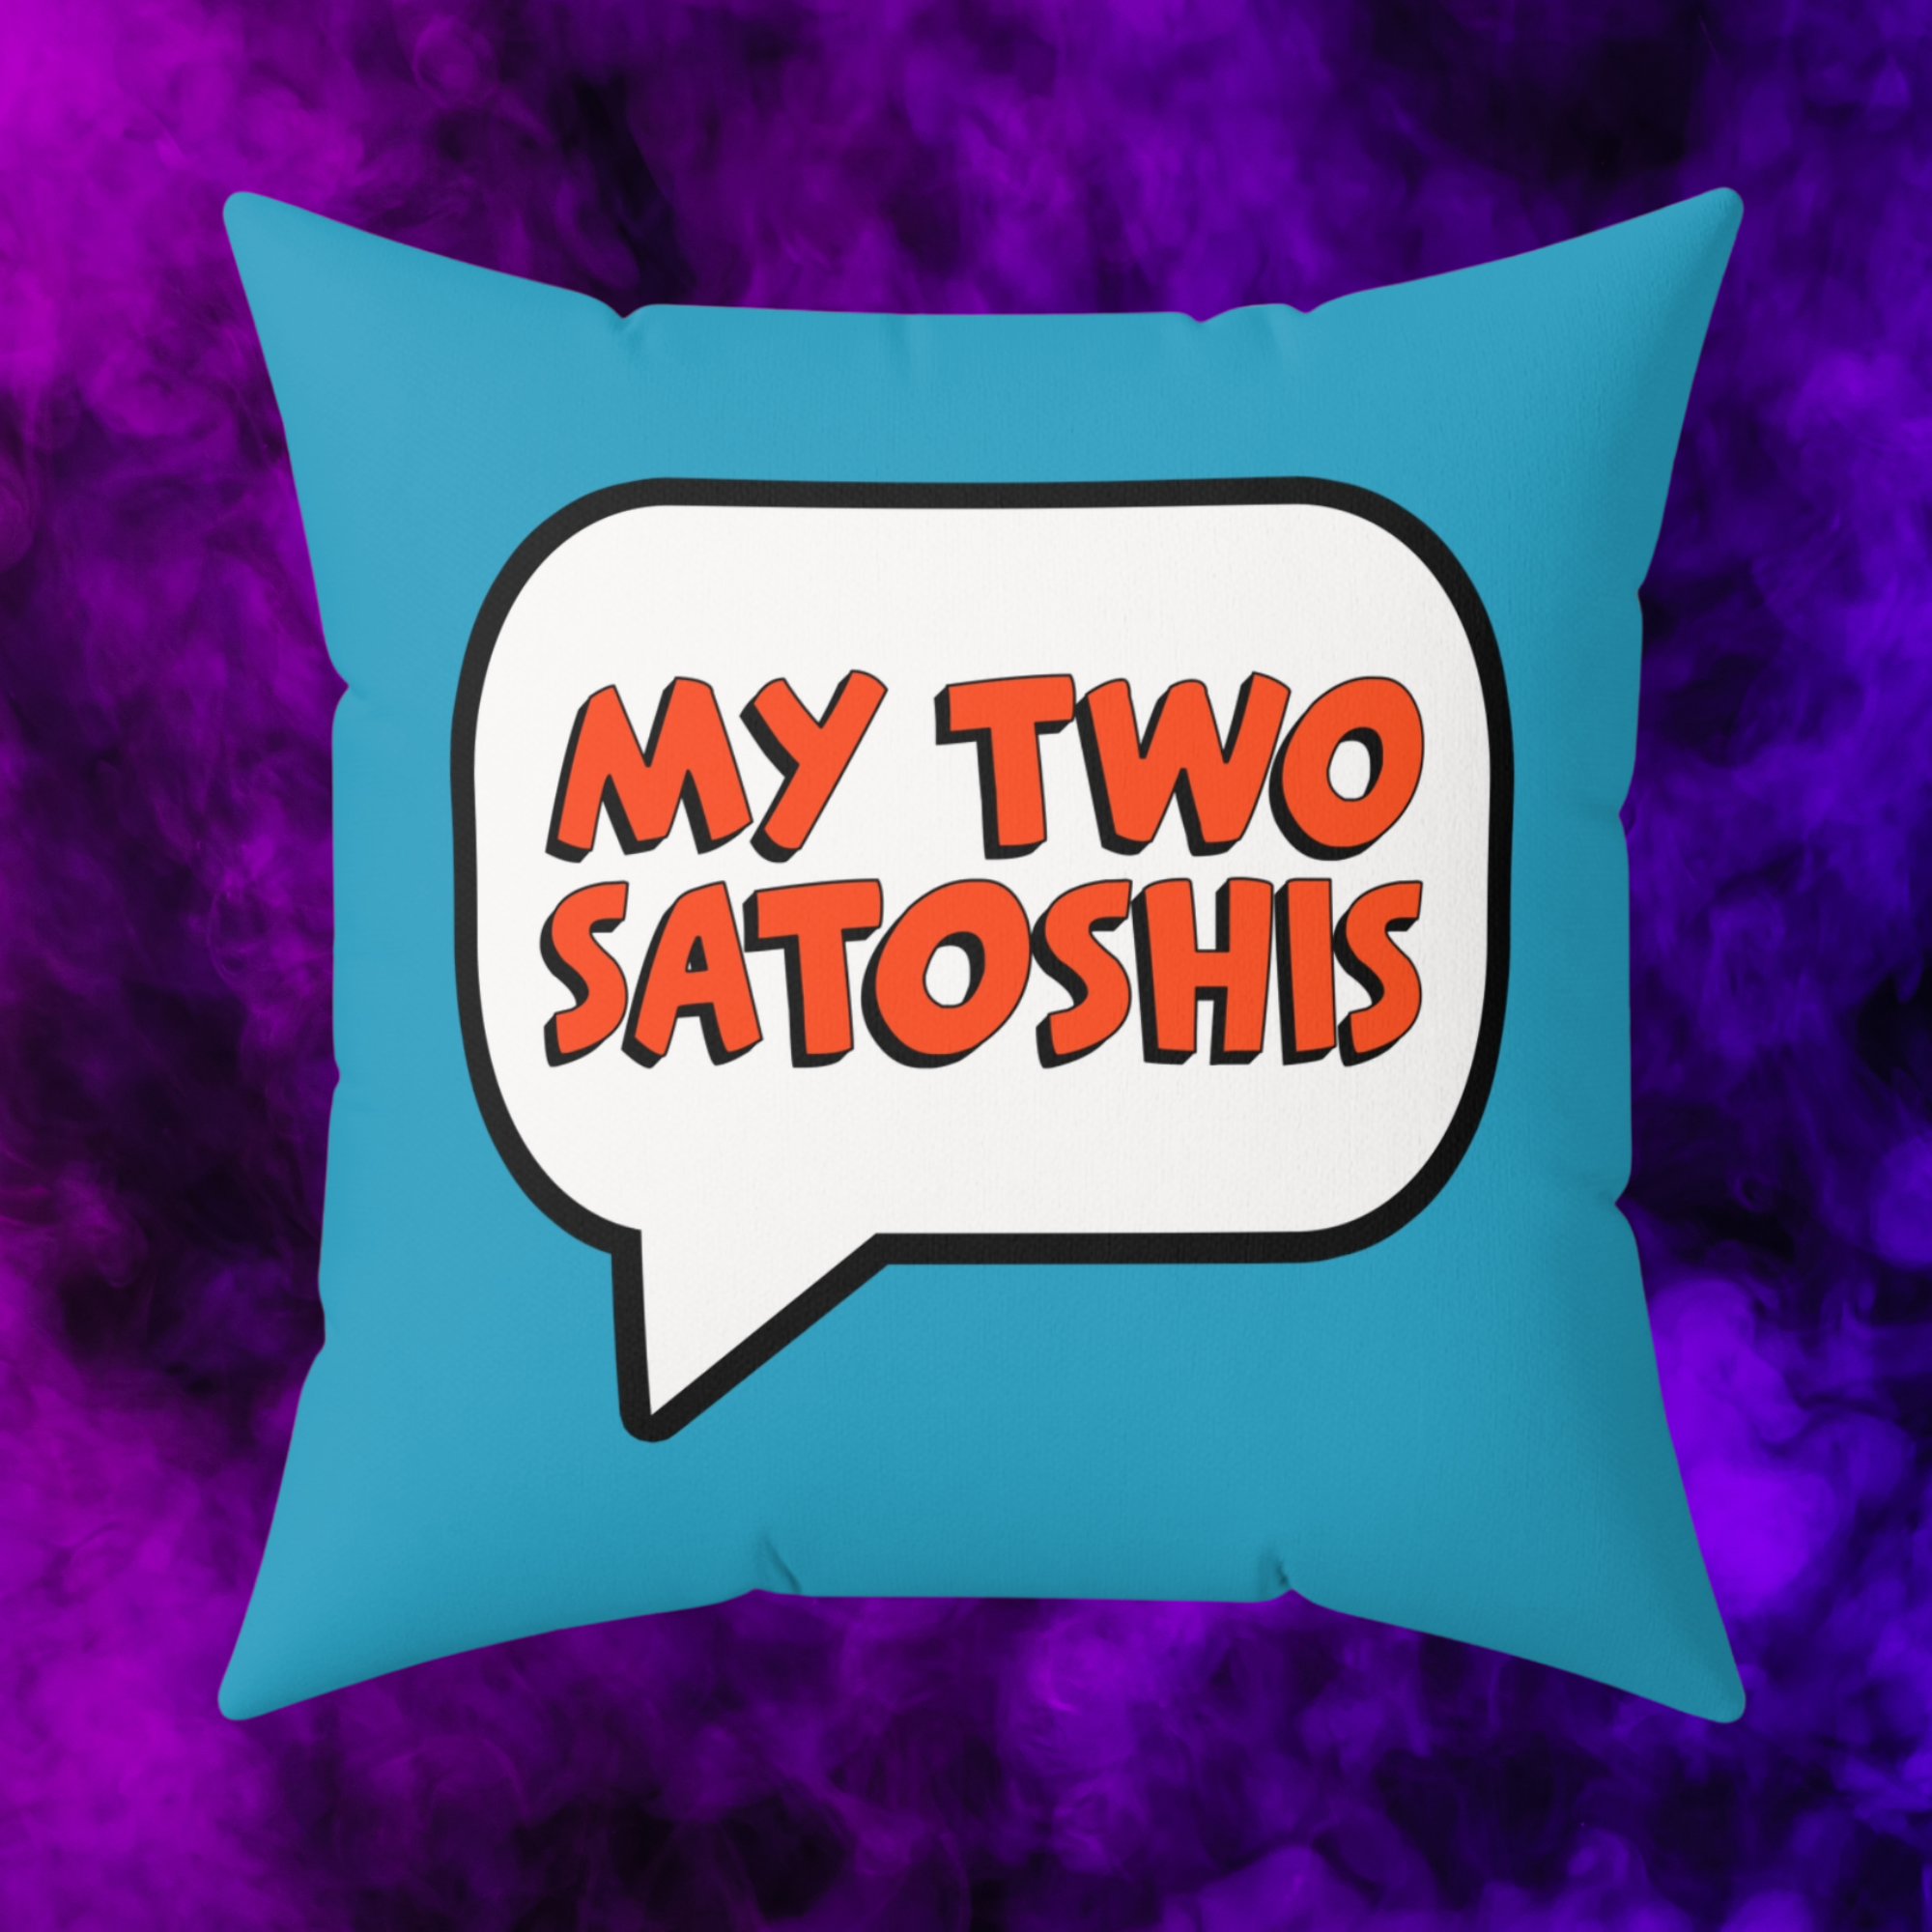 Bitcoin Home Decor - My Two Satoshis Pillow available from NEONCRYPTO STORE.